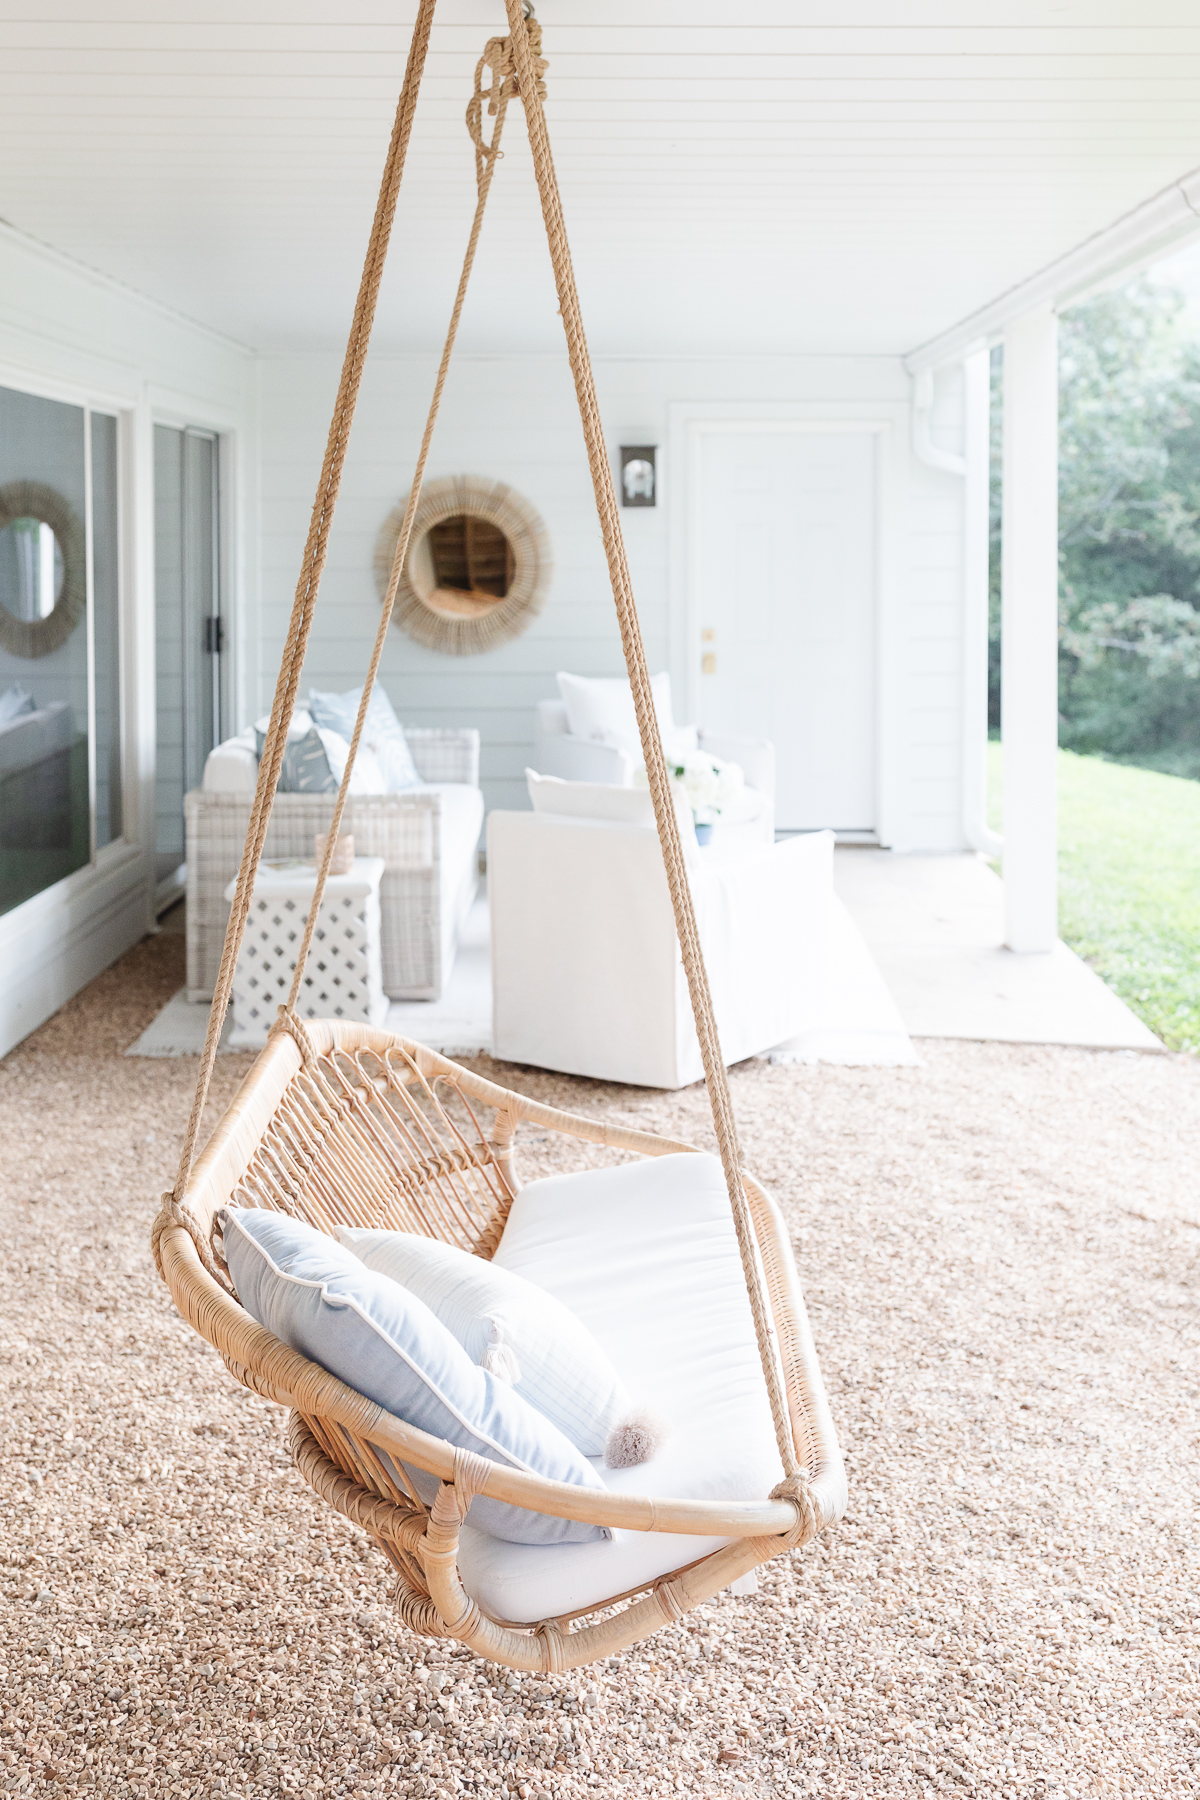 A wicker swing hanging from a porch.